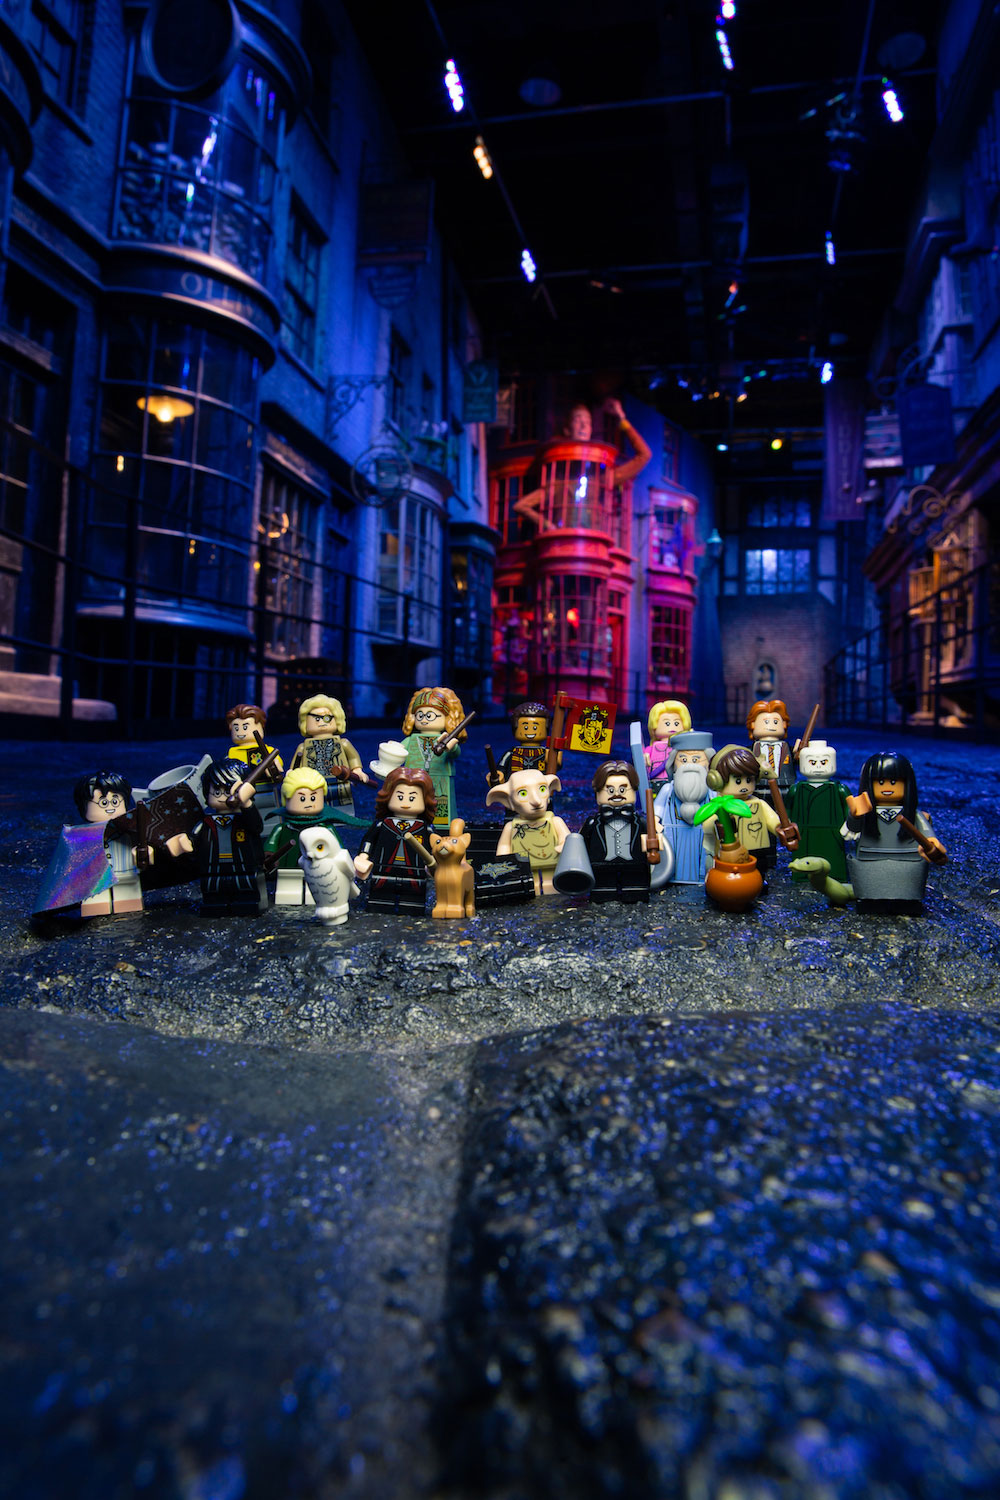 All of the figures included in the “Harry Potter” group of LEGO minifigures pose in front of Diagon Alley at the Studio Tour.